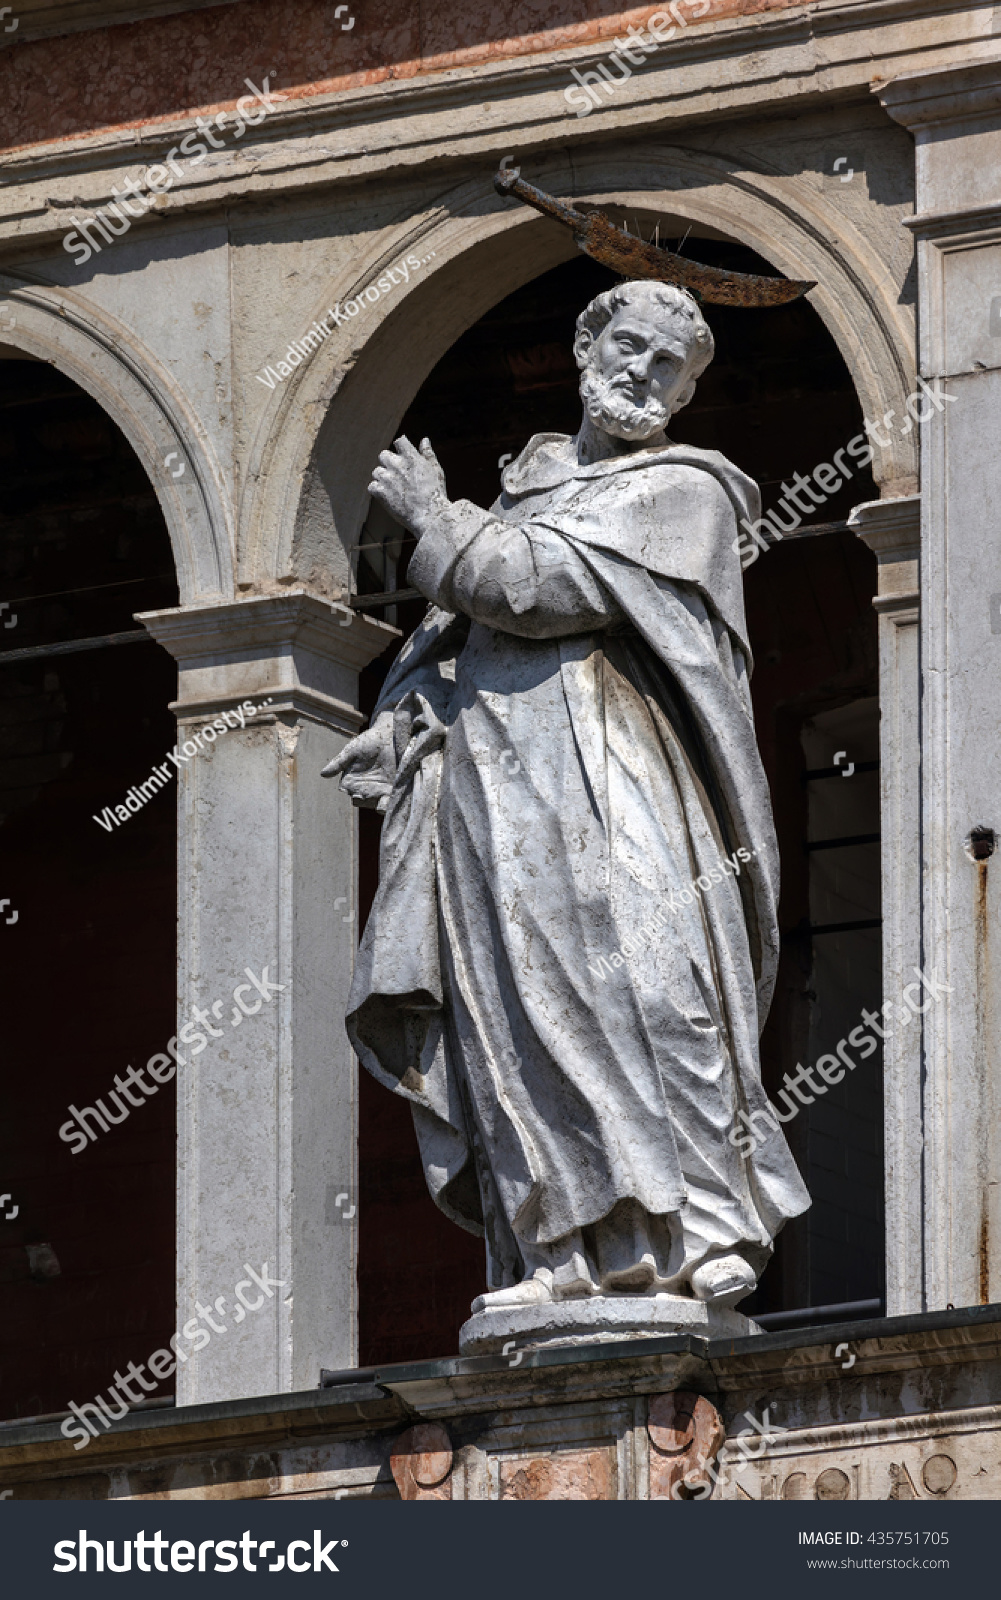 Medieval statue of Saint Peter the Martyr with a hatchet in his head decorating the facade of the Cremona Cathedral. #435751705